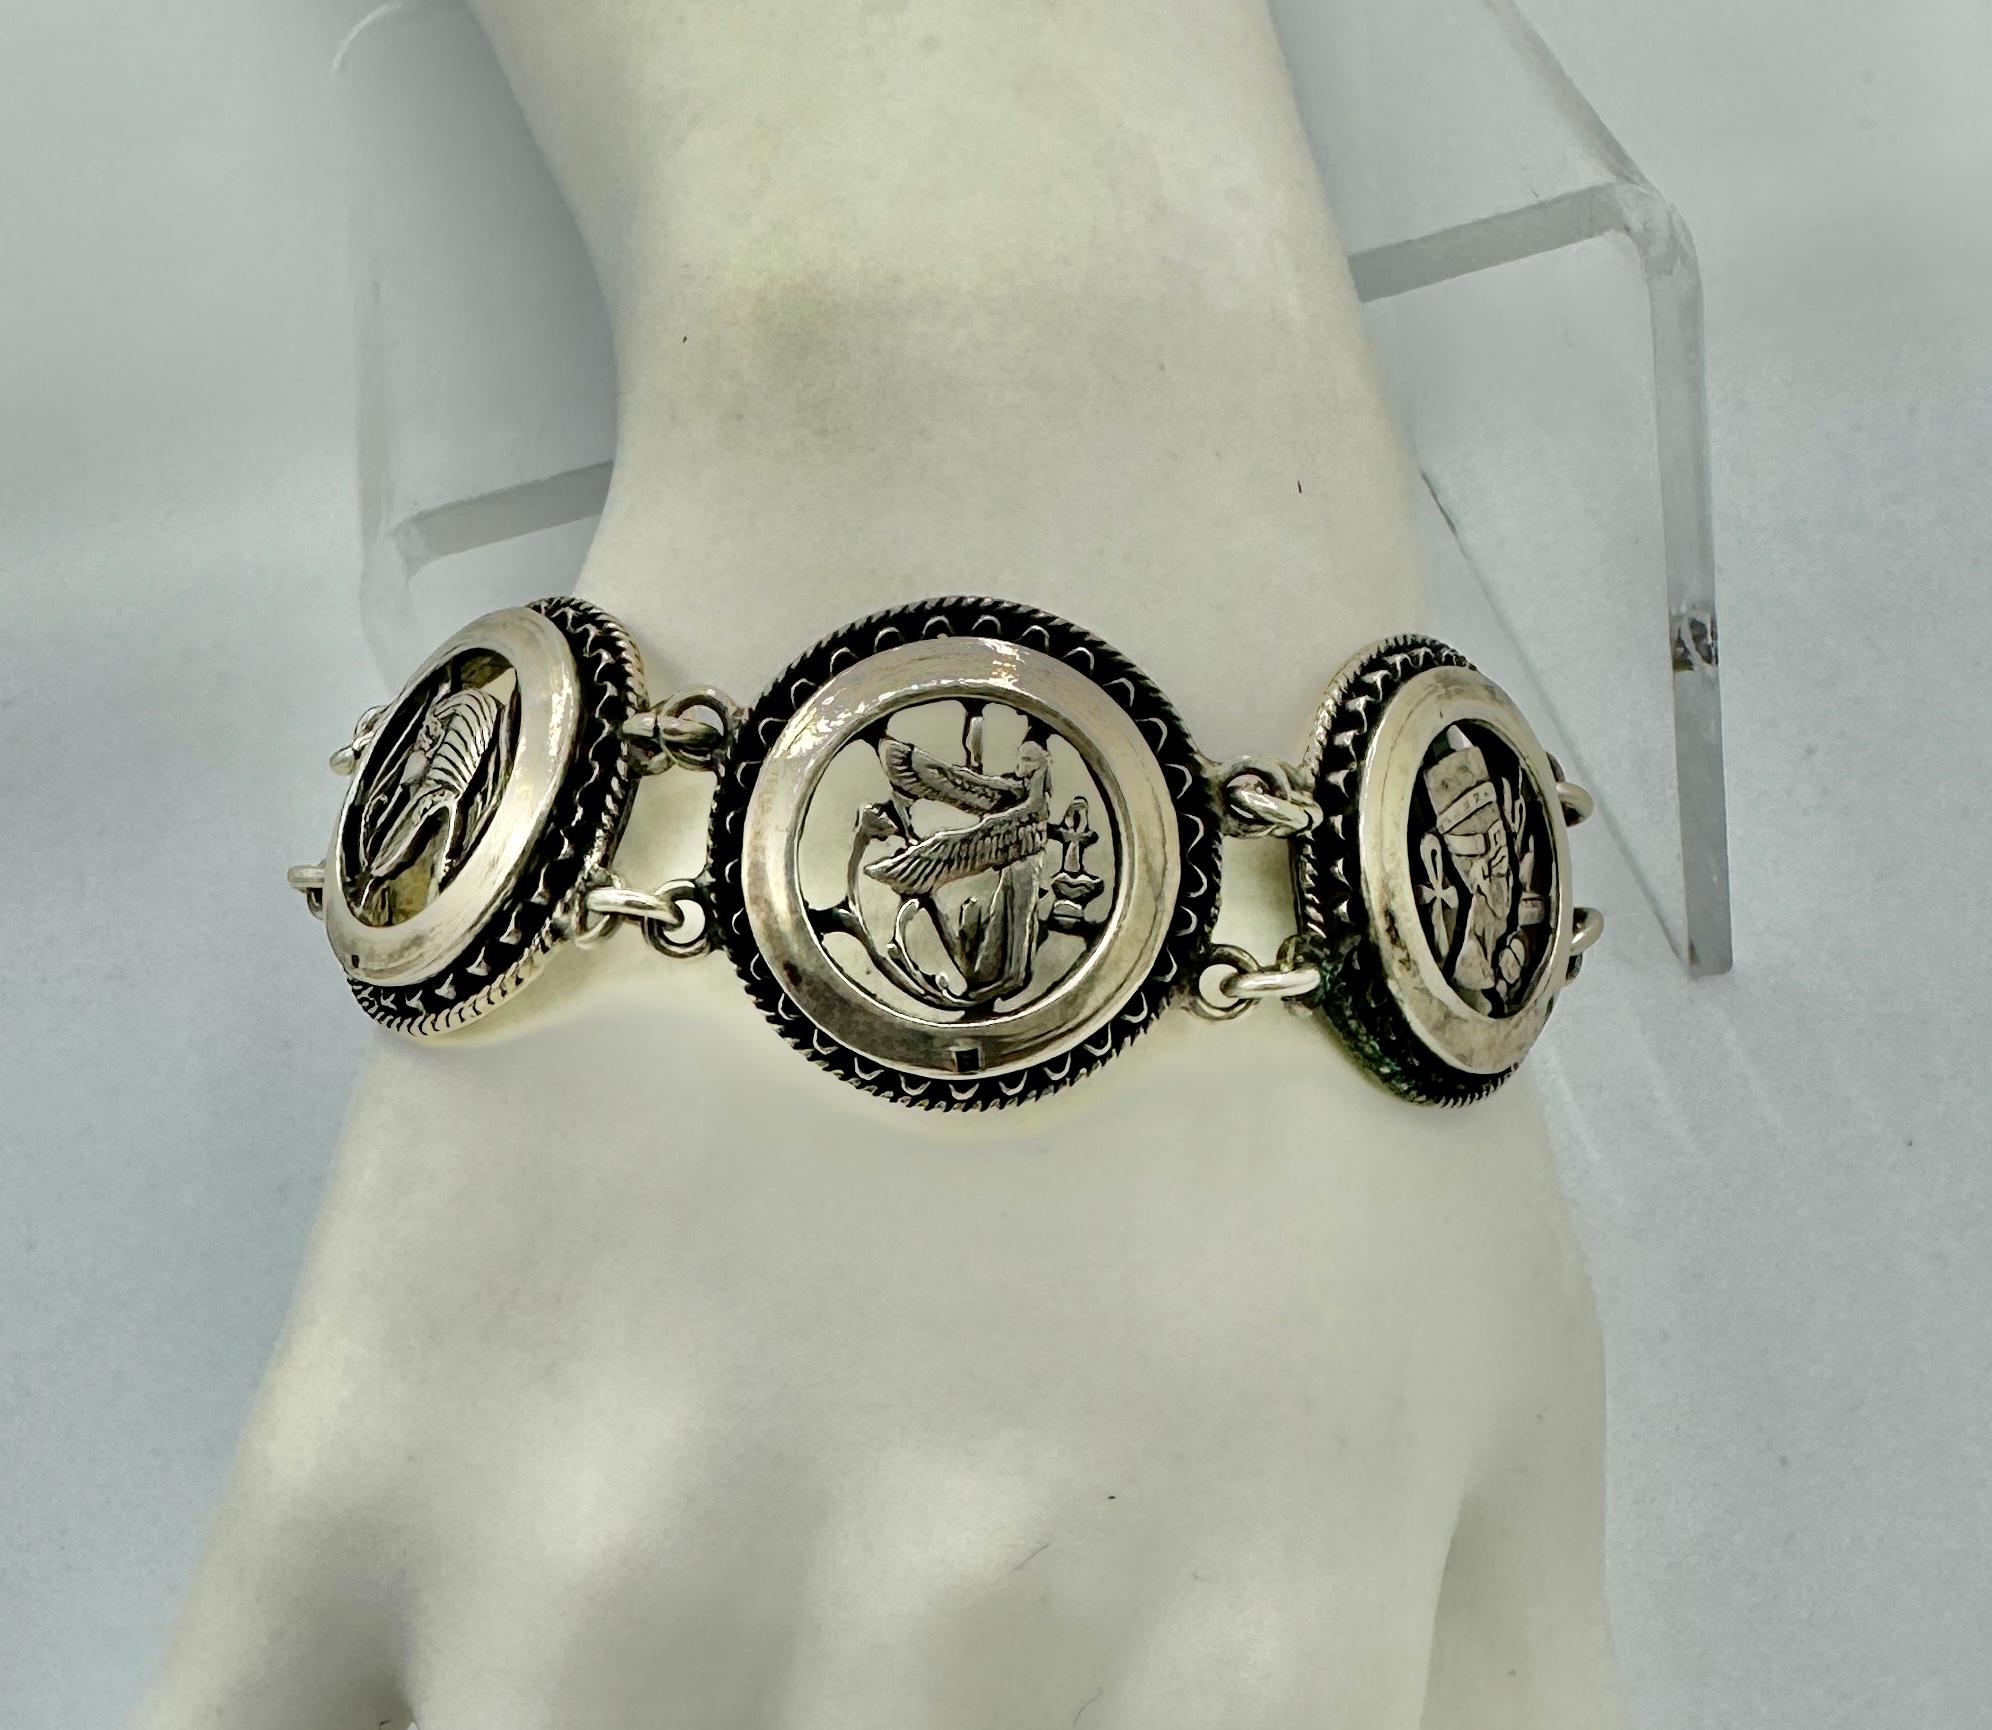 This is a wonderful antique Art Deco Egyptian Revival Bracelet with spectacular images from Ancient Egypt in Sterling Silver.  The images include a chariot, King Tut, a winged pharaoh, Nefertiti and lotus flowers. The bracelet is of substantial